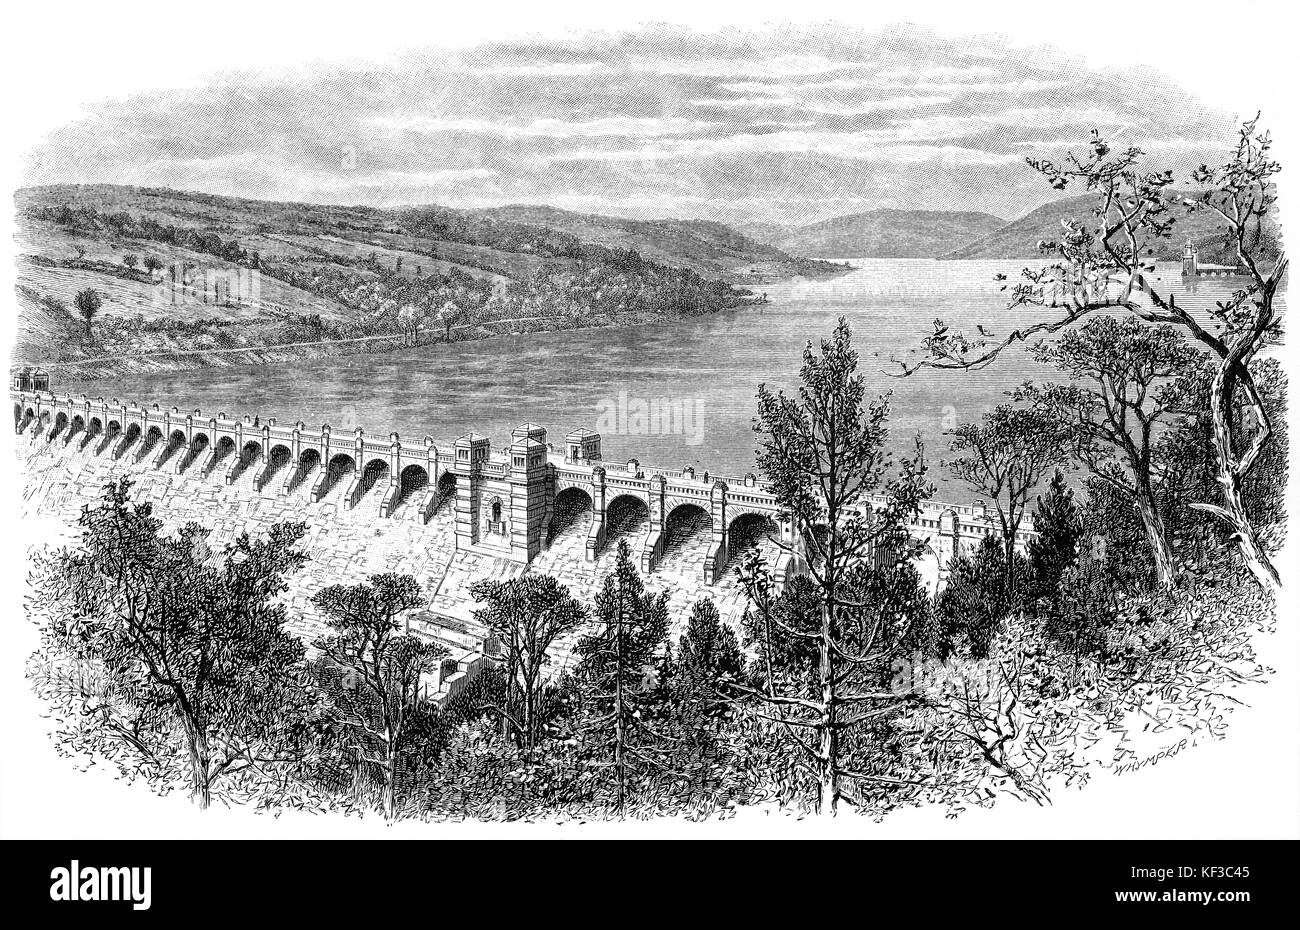 1890: Lake Vyrnwy is a reservoir in Powys, North Wales, built in the 1880s to supply Liverpool with fresh water. It flooded the head of the Vyrnwy valley and submerged the village of Llanwddyn. Dam construction started in 1881 and was completed in 1888 making it the first large stone-built dam in the United Kingdom. Stock Photo